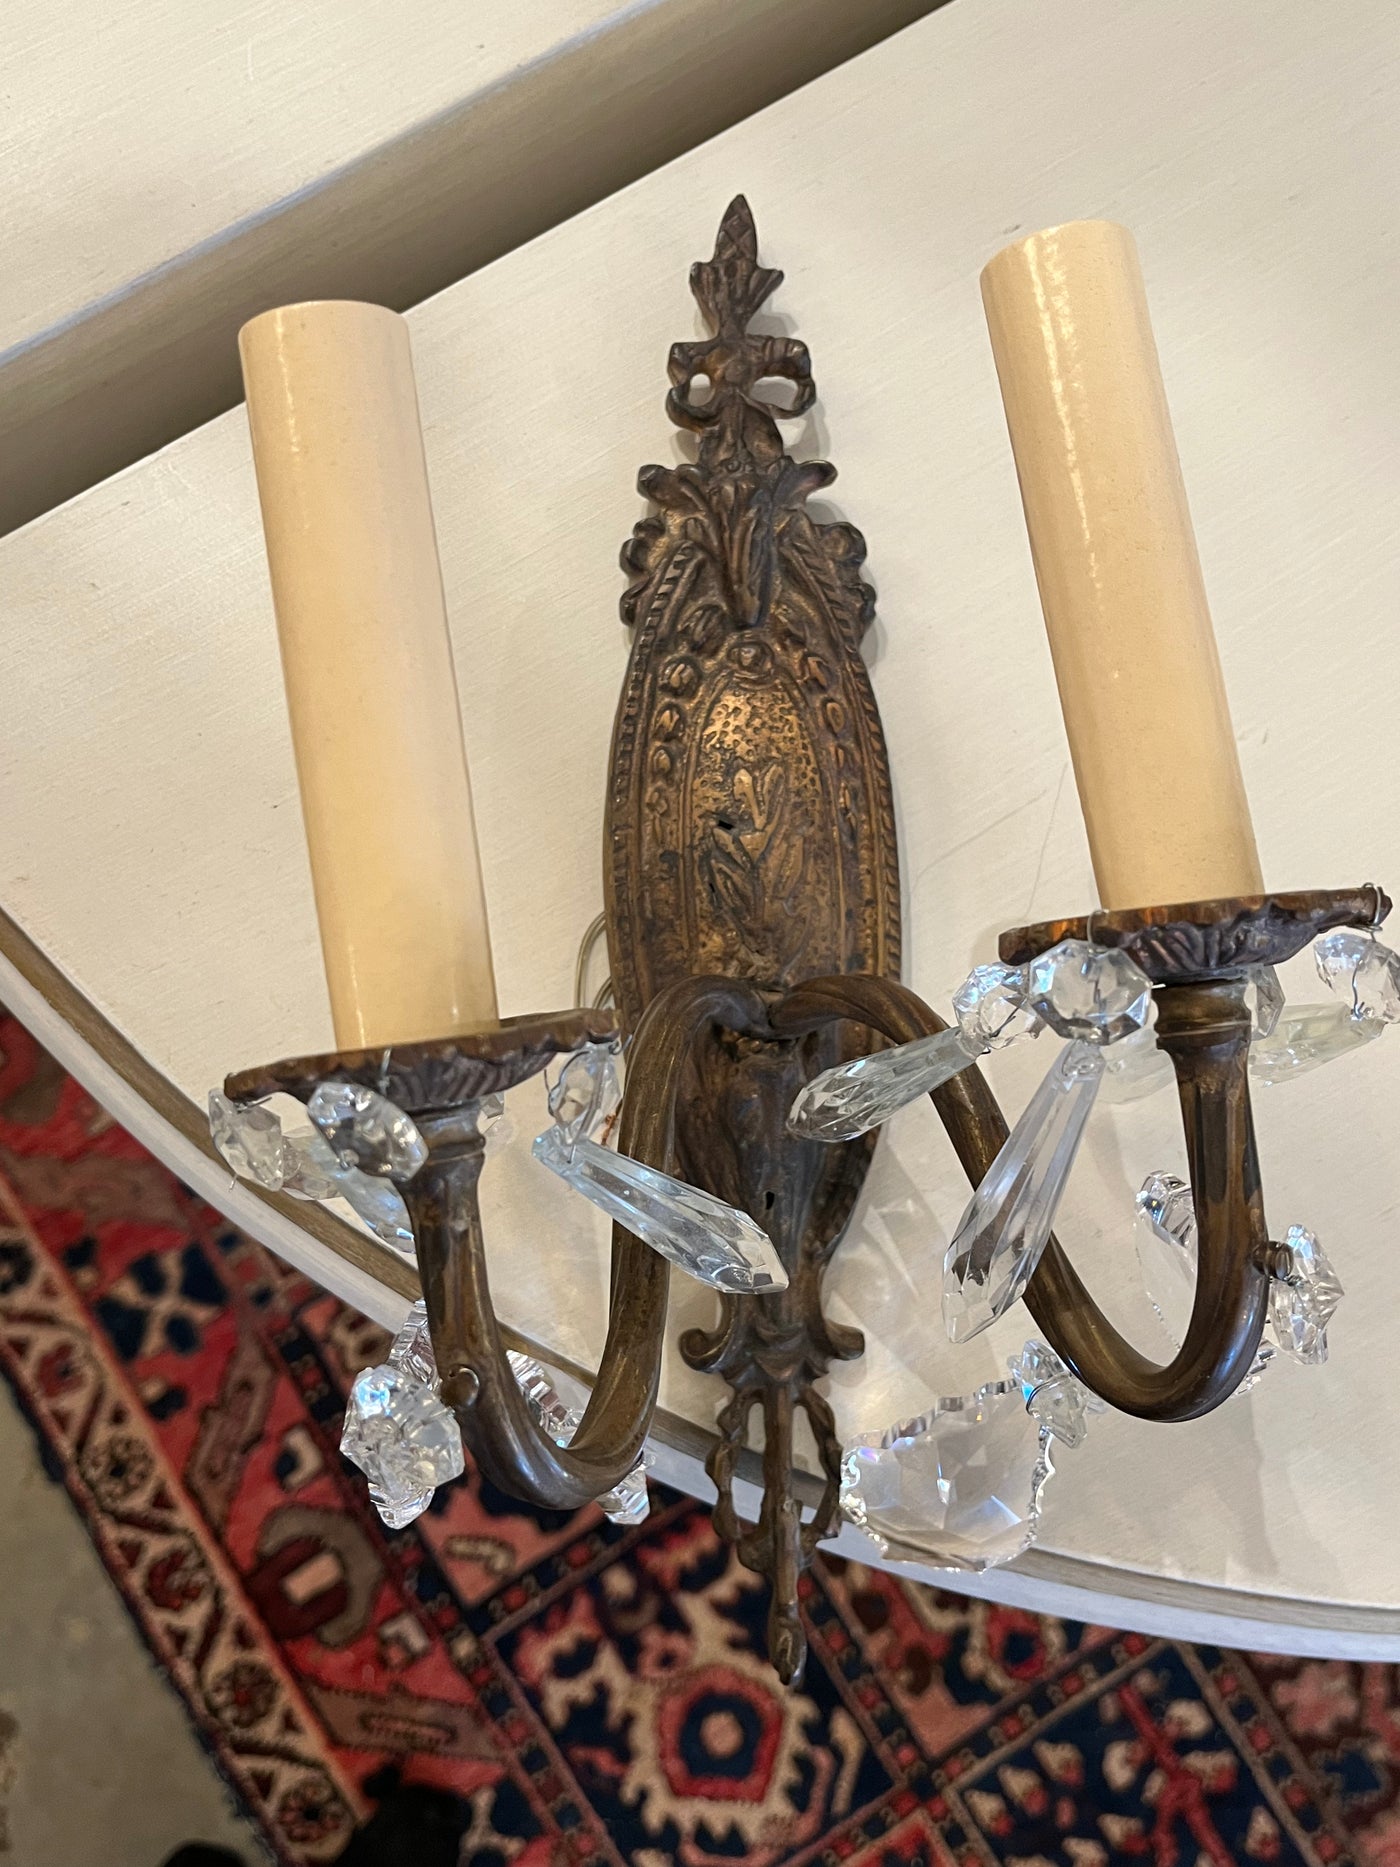 Petite Brass Sconces with Crystal Details